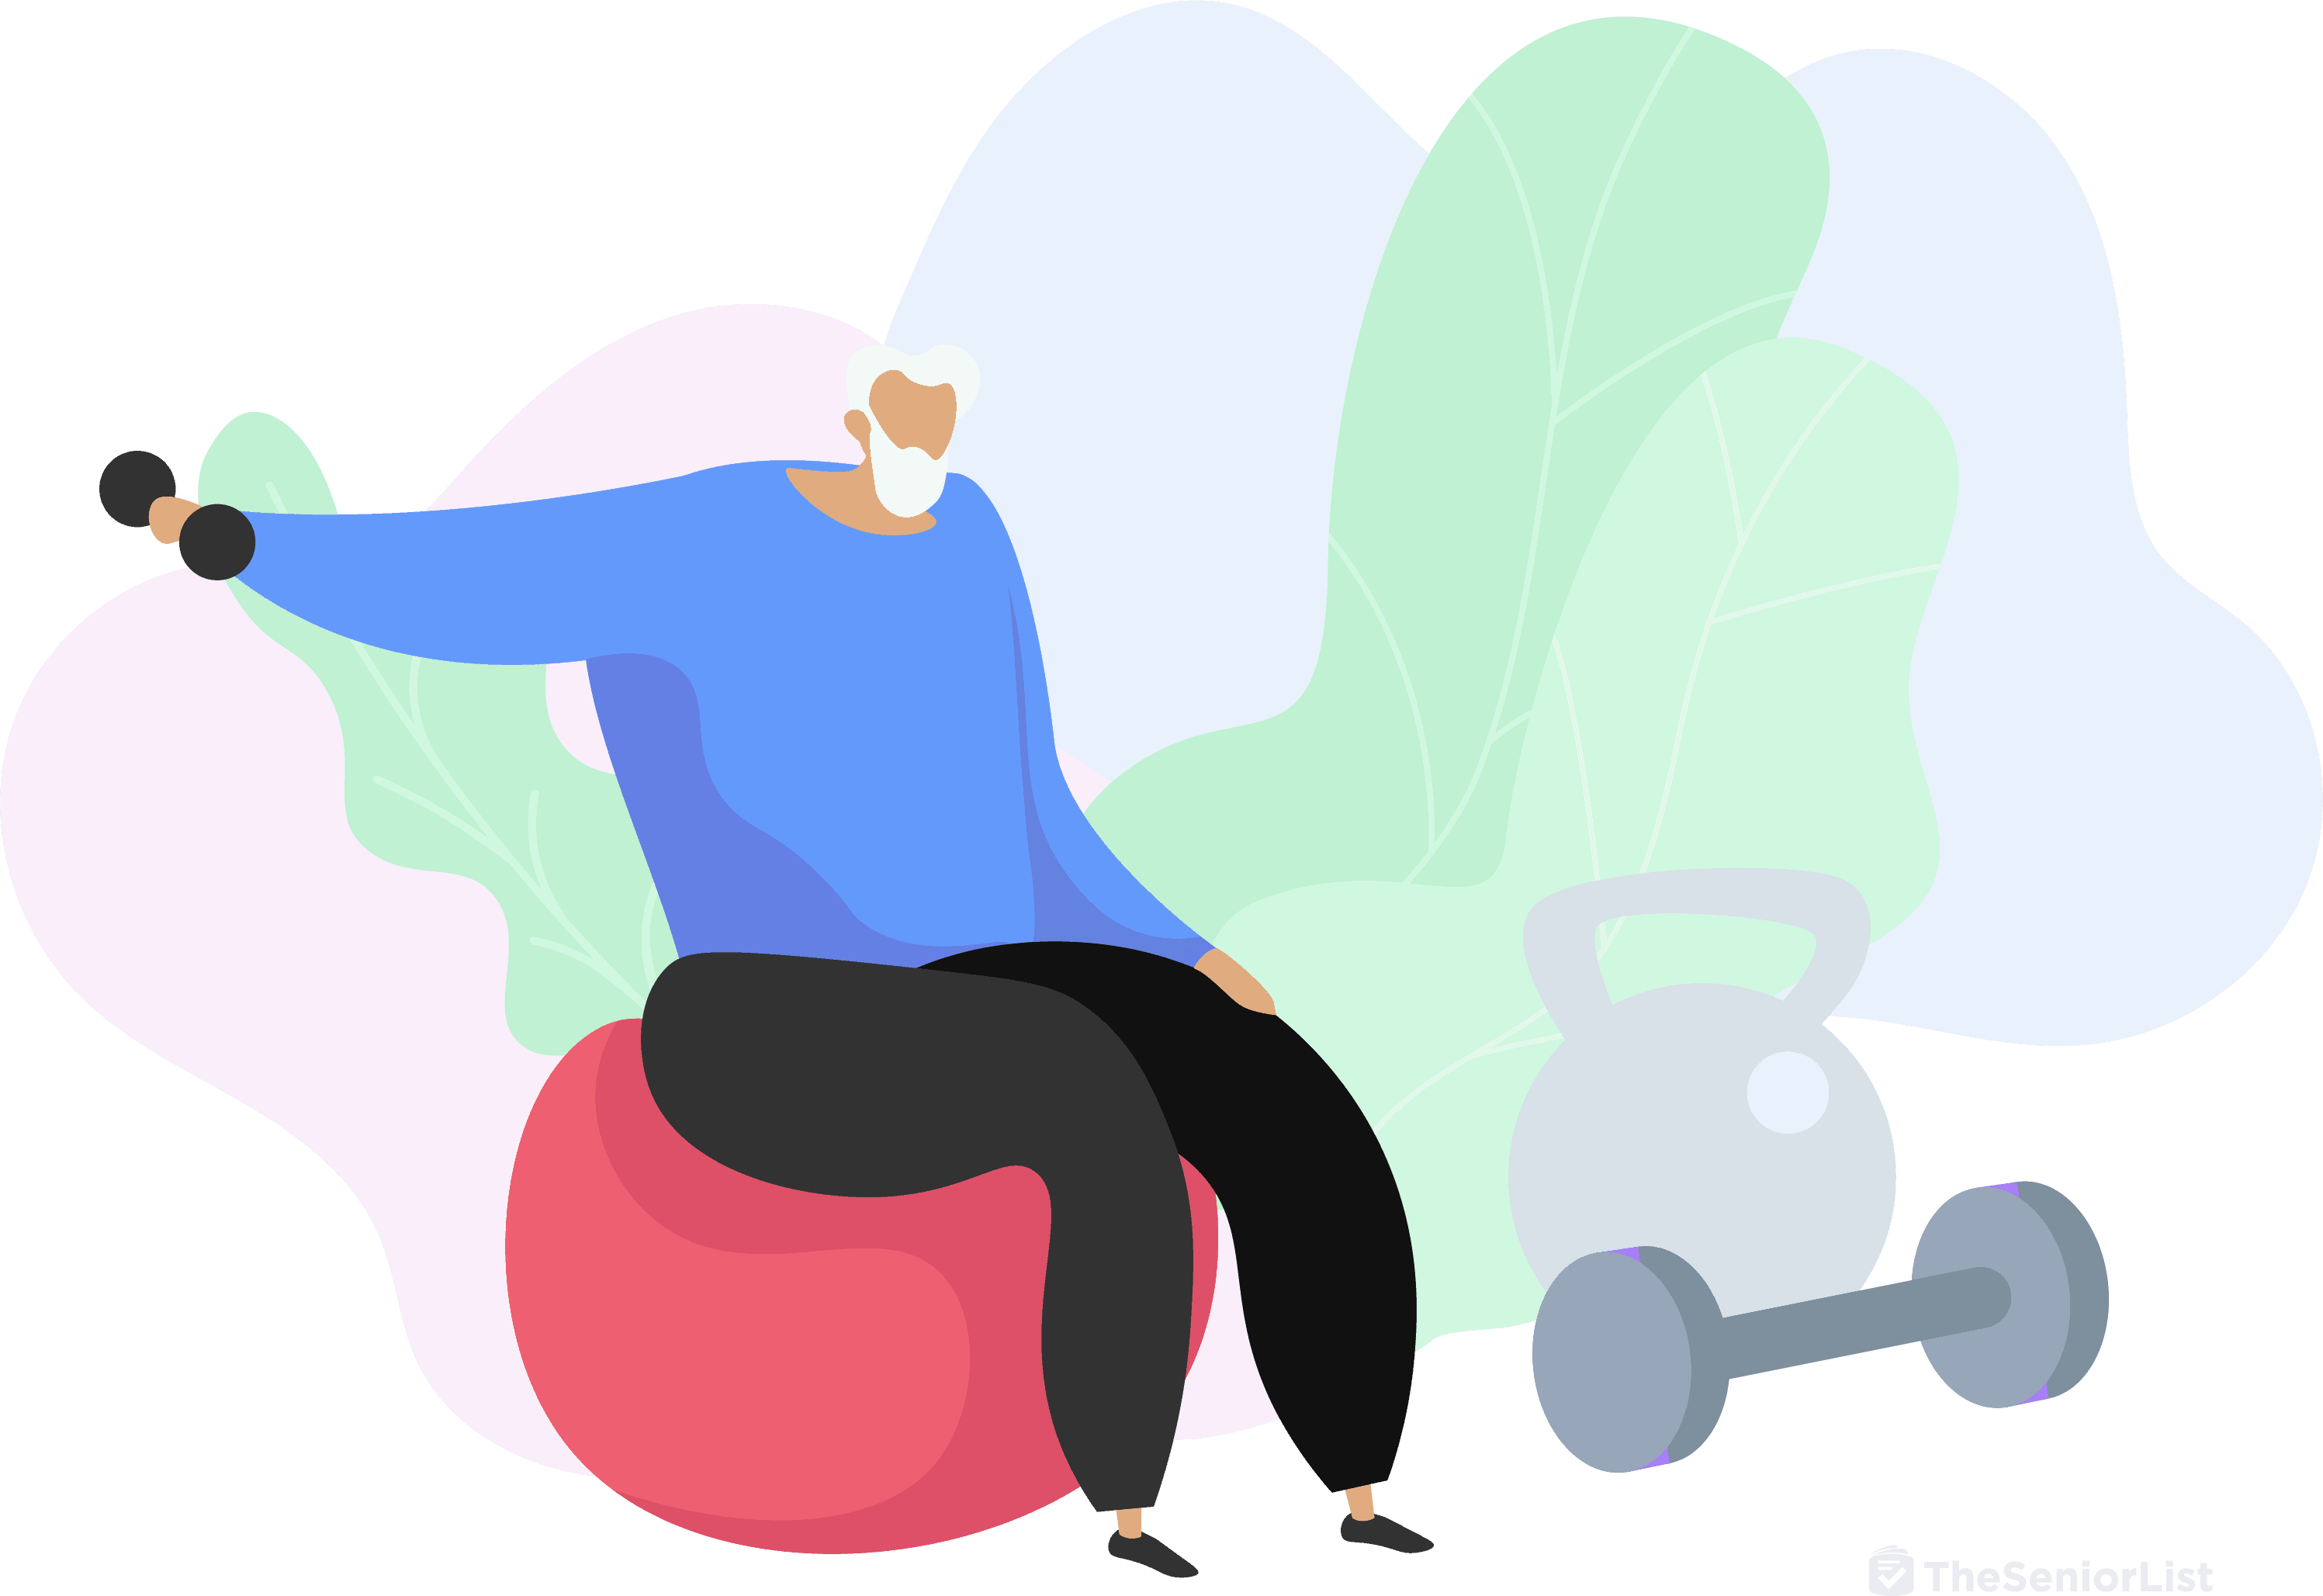 Person sitting on exercise ball lifting a free weight